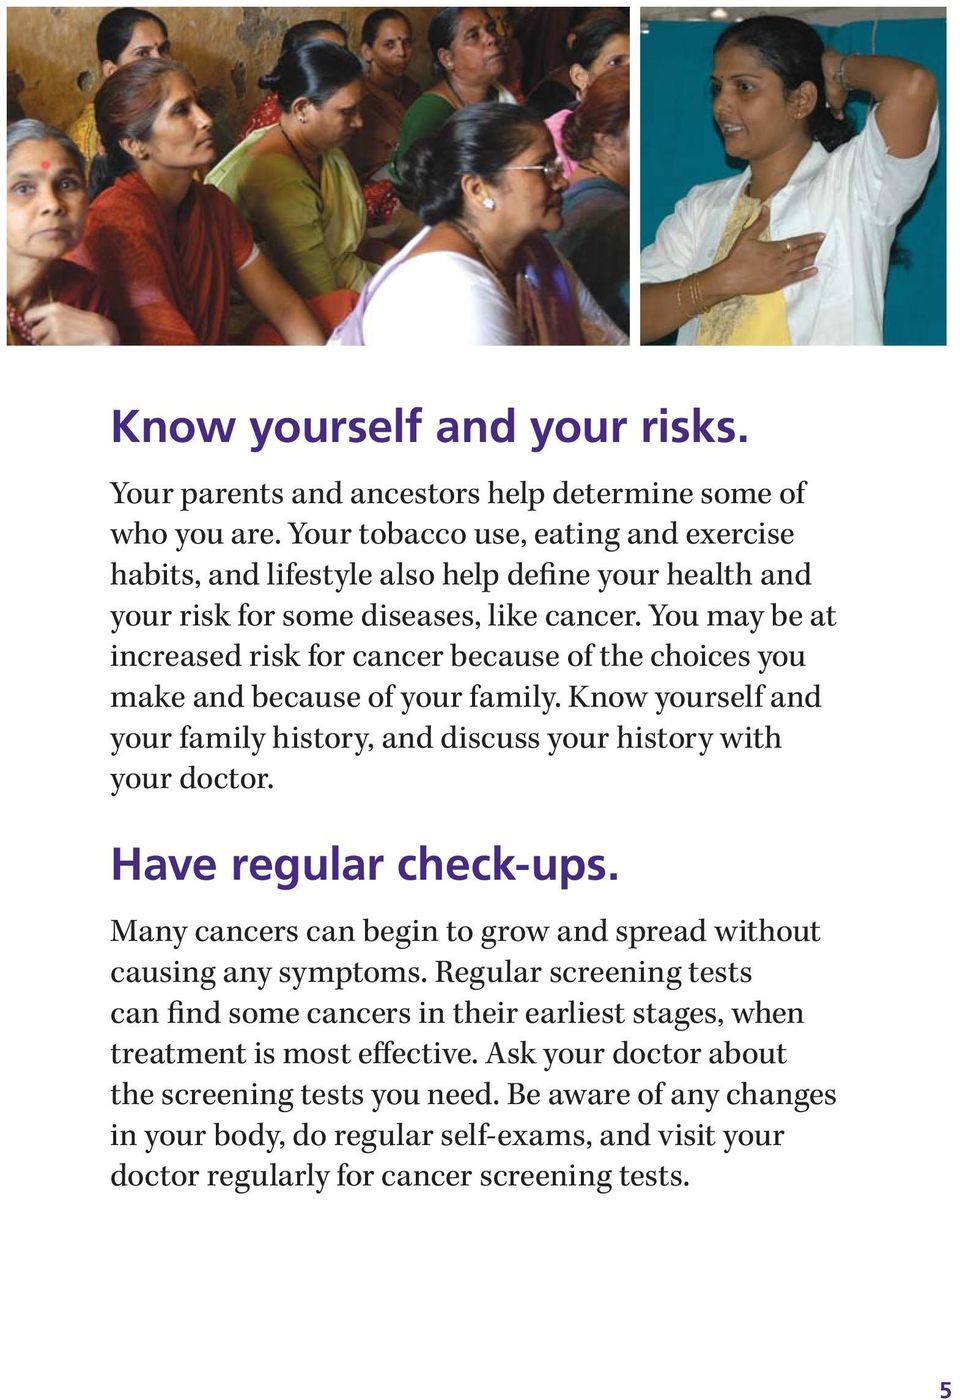 You may be at increased risk for cancer because of the choices you make and because of your family. Know yourself and your family history, and discuss your history with your doctor.